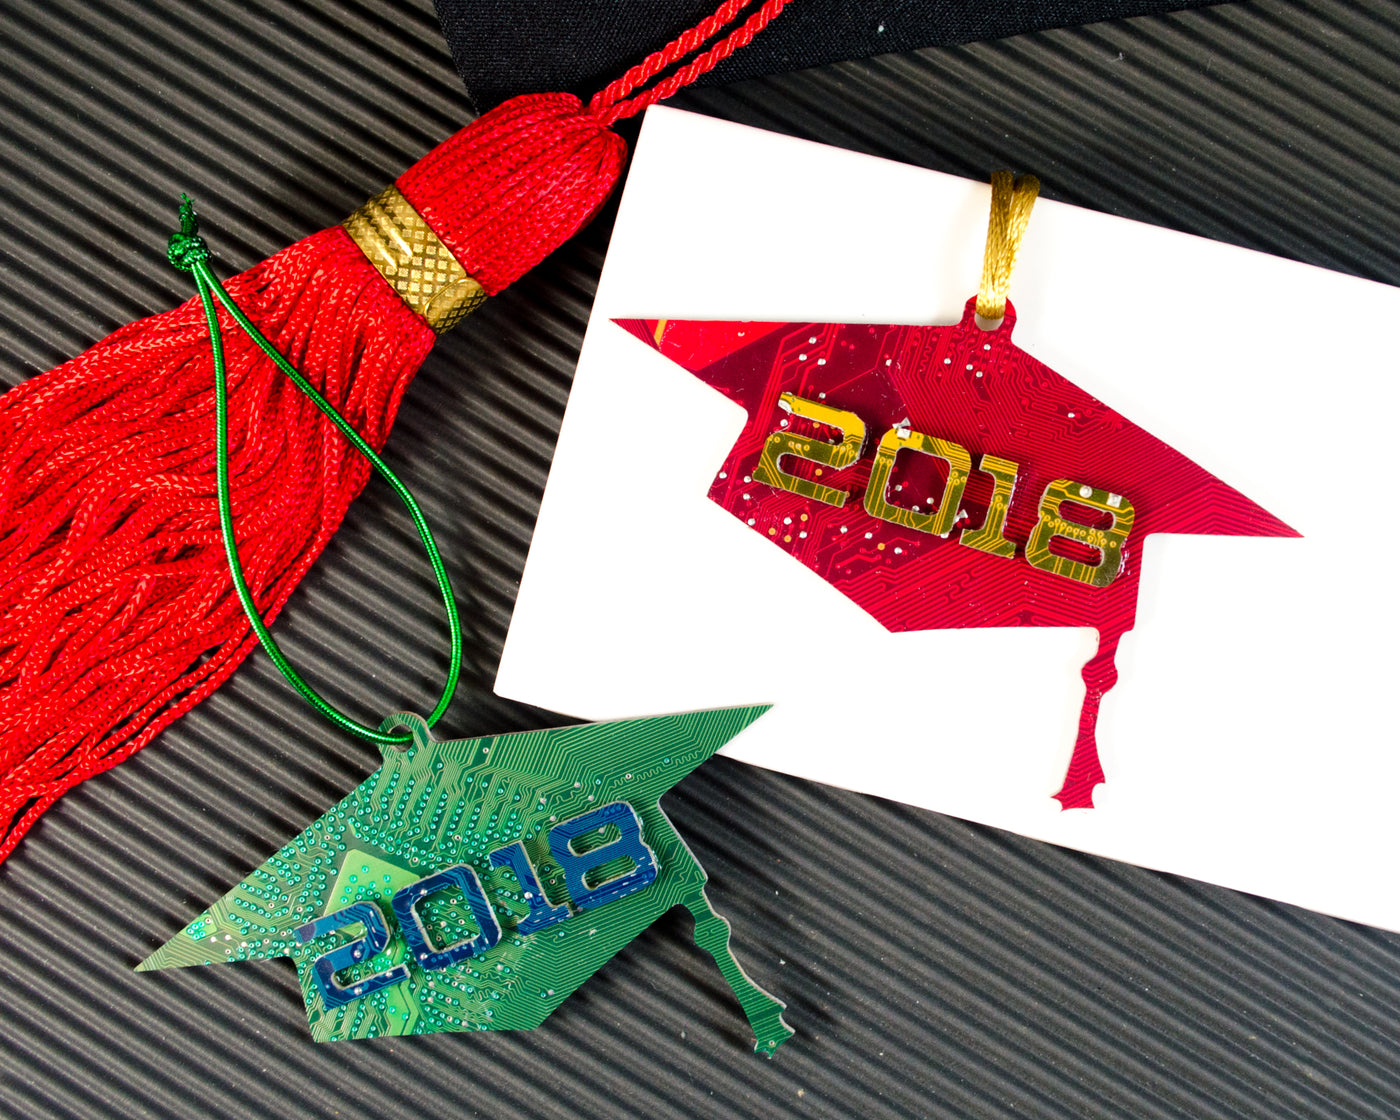 red and green graduation cap ornaments with graduation year